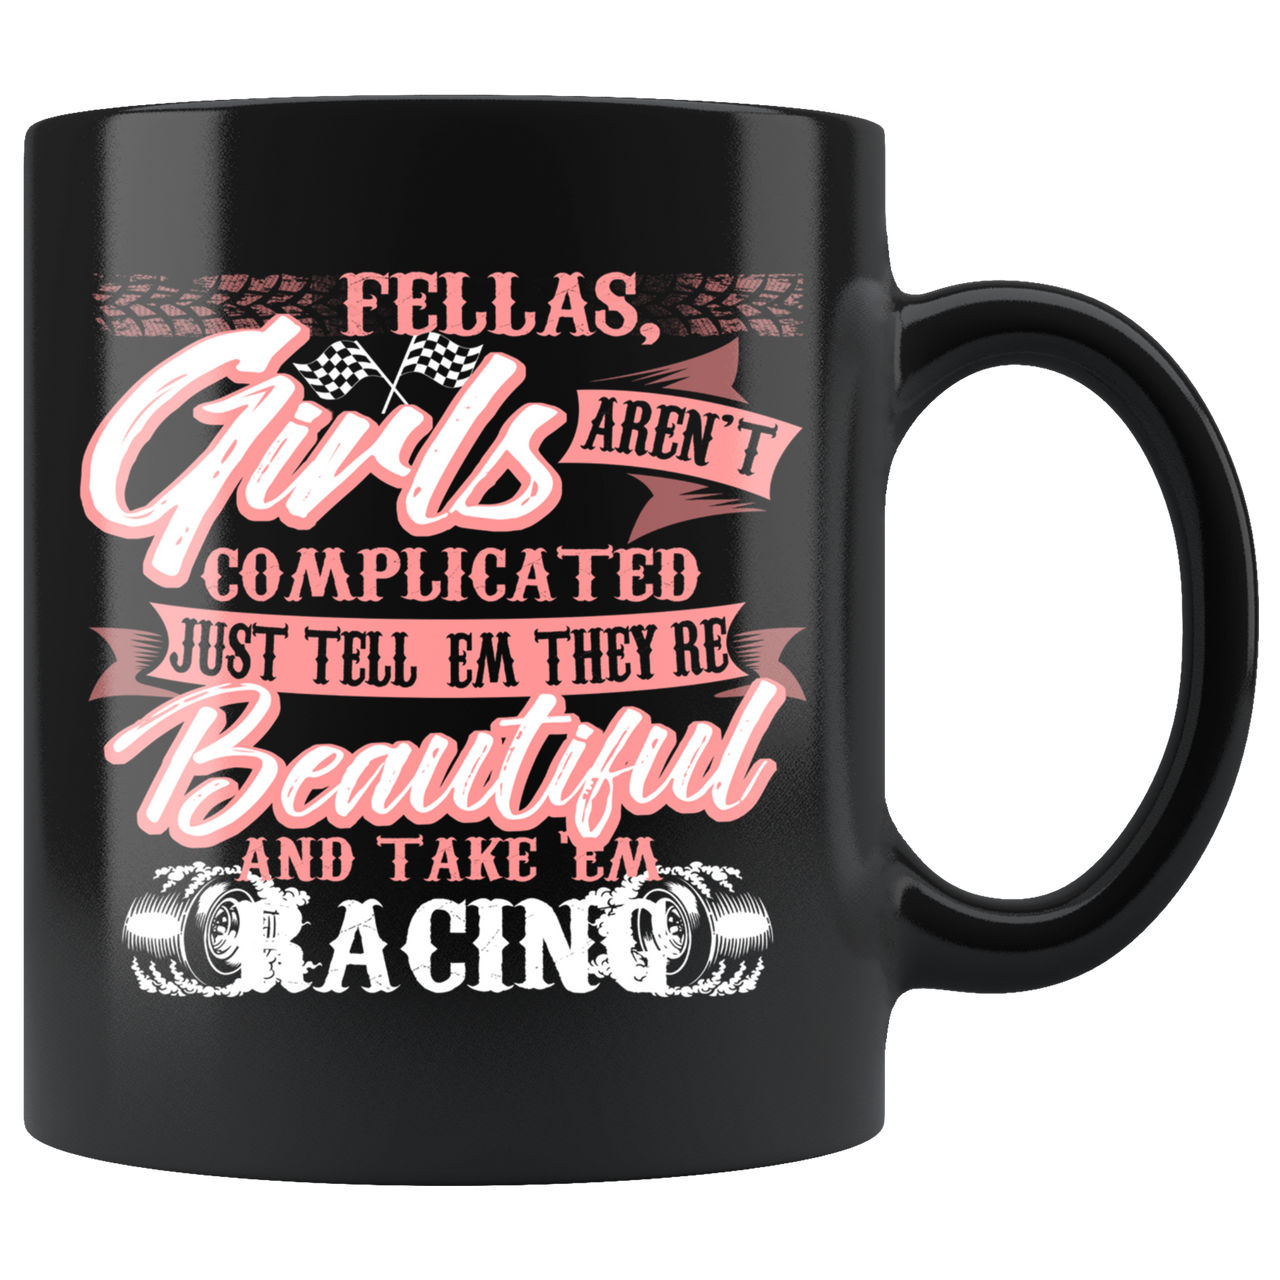 Fellas Girls Aren't Complicated Just Tell Them They're Beautiful And Take Them Racing Mug!